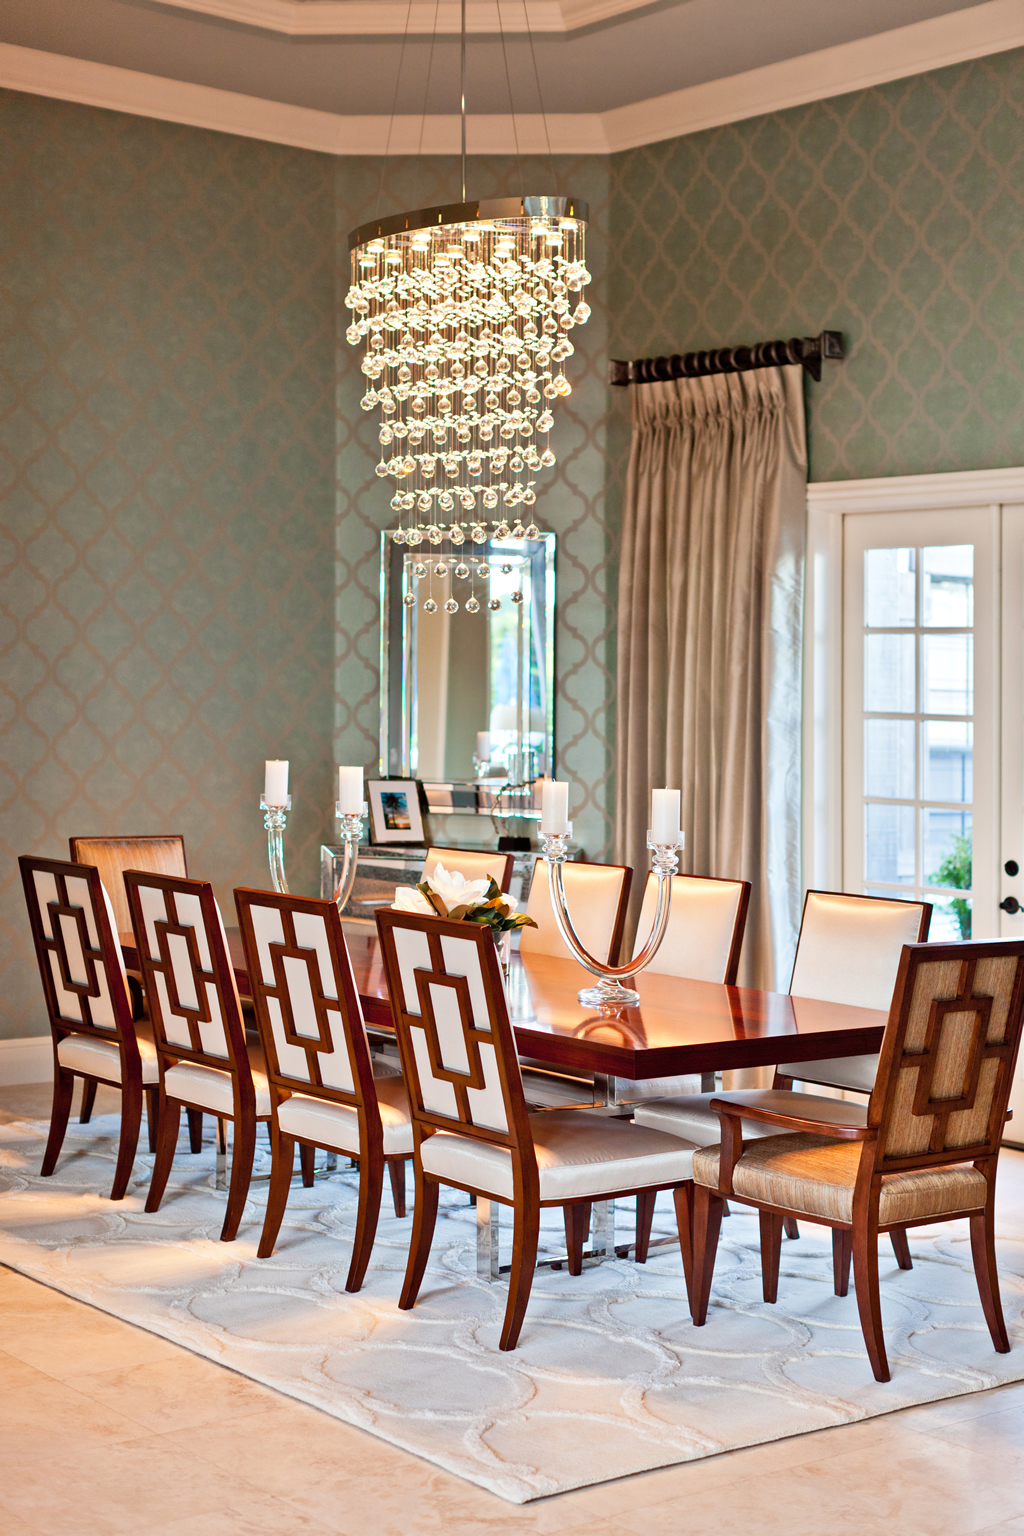 Chandelier above formal dining table and chairs